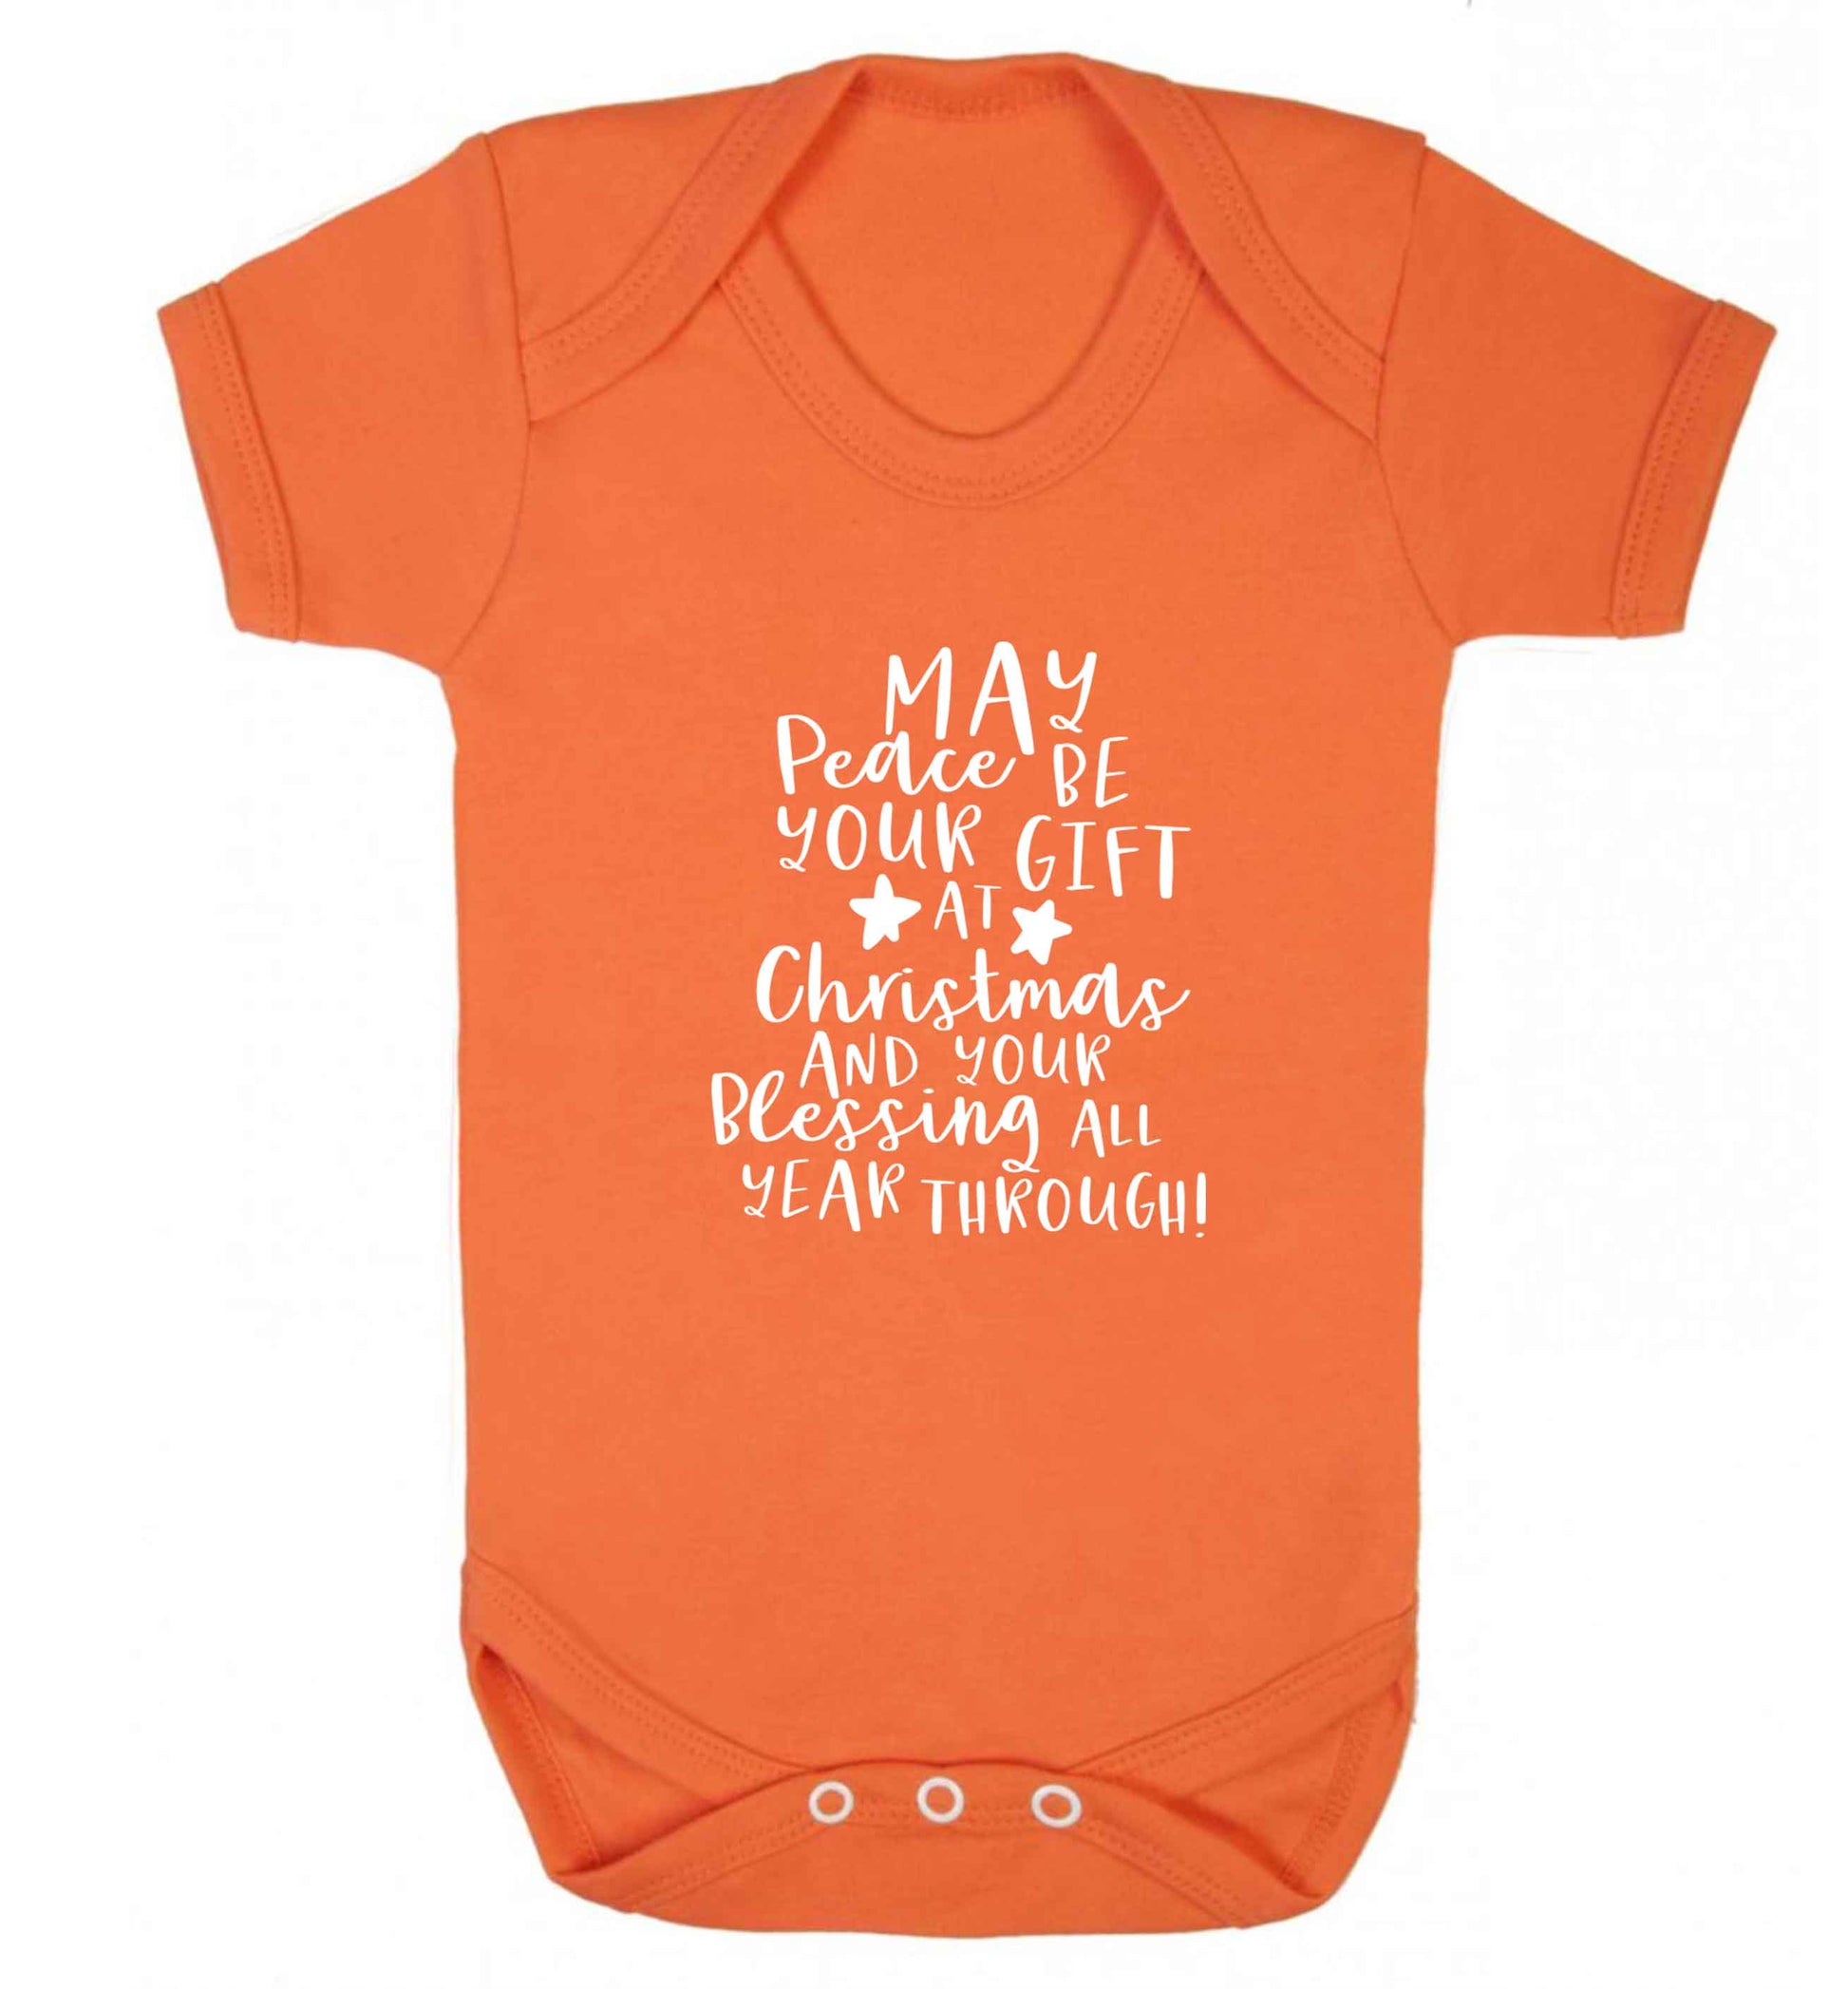 Peace be your Gift at Christmas Gift baby vest orange 18-24 months